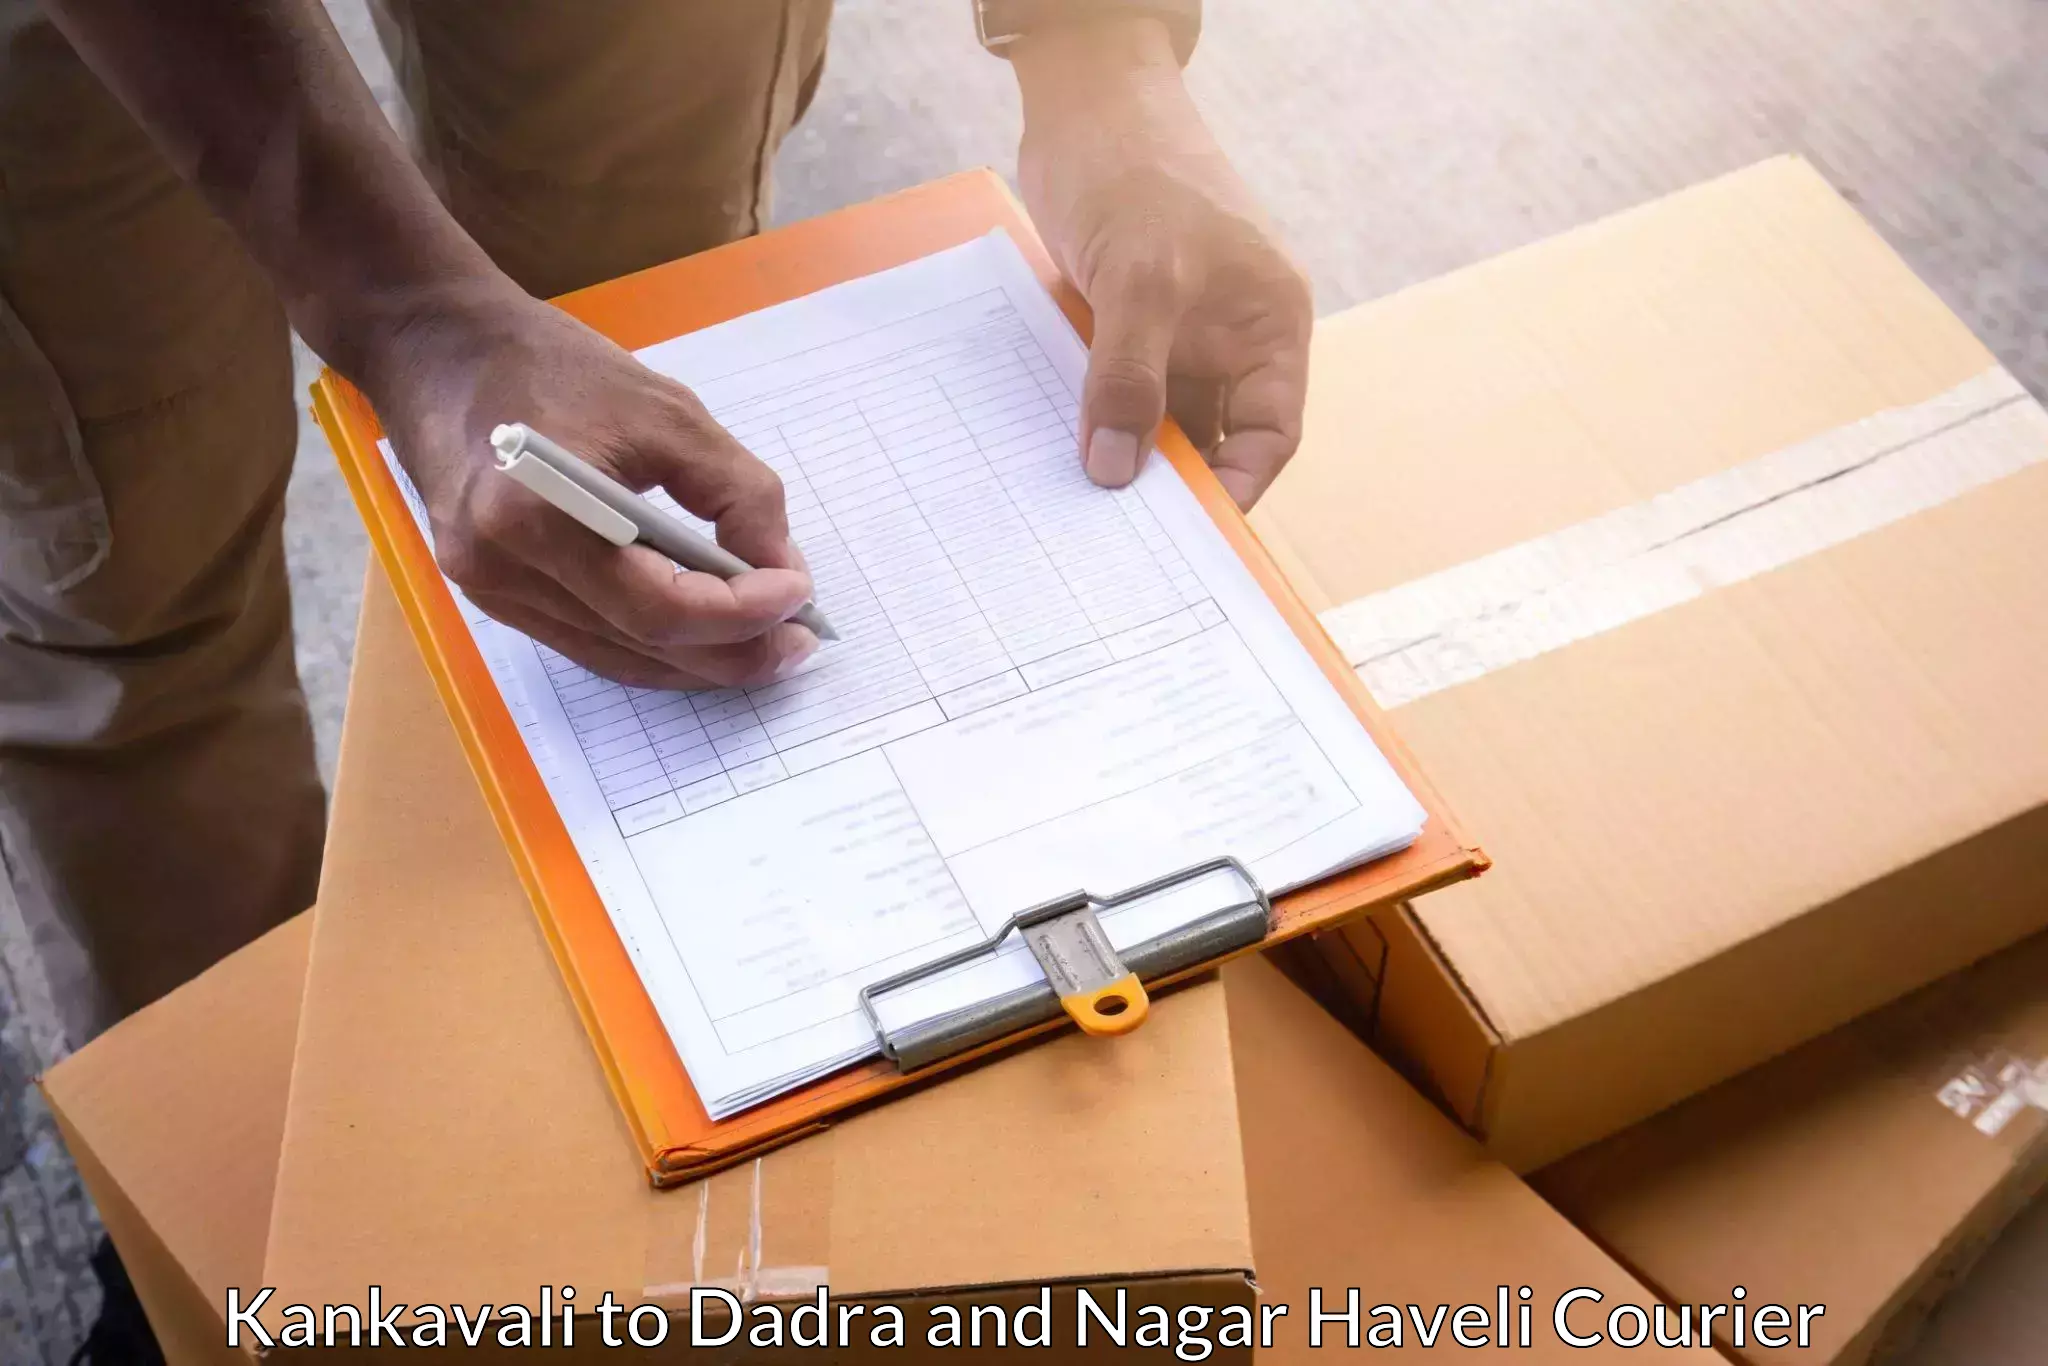 Package delivery network Kankavali to Dadra and Nagar Haveli